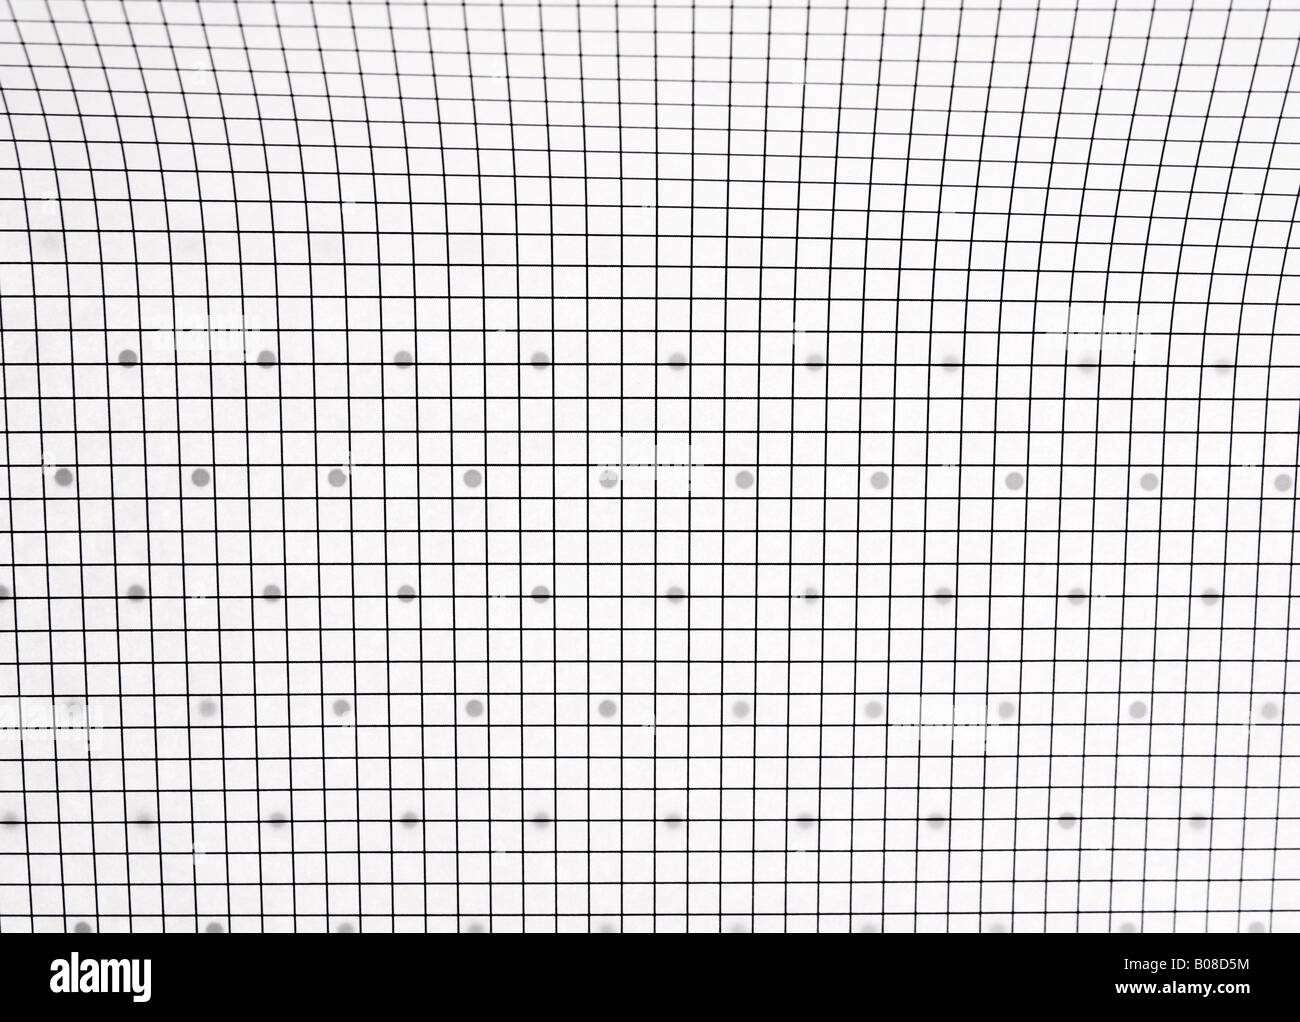 a sheet of regular graph paper over a dot graph page Stock Photo